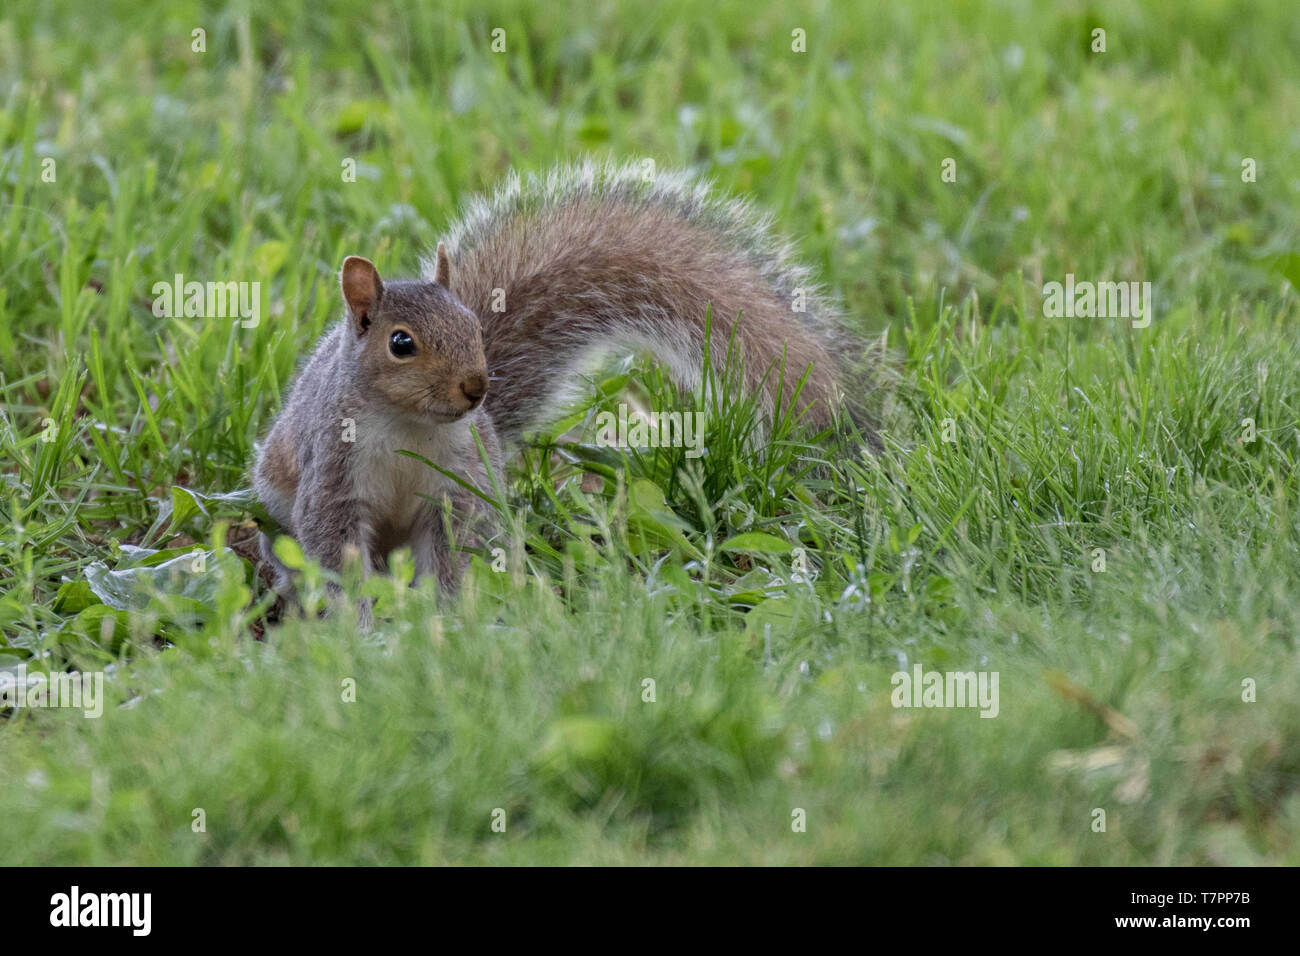 An eastern gray squirrel Stock Photo